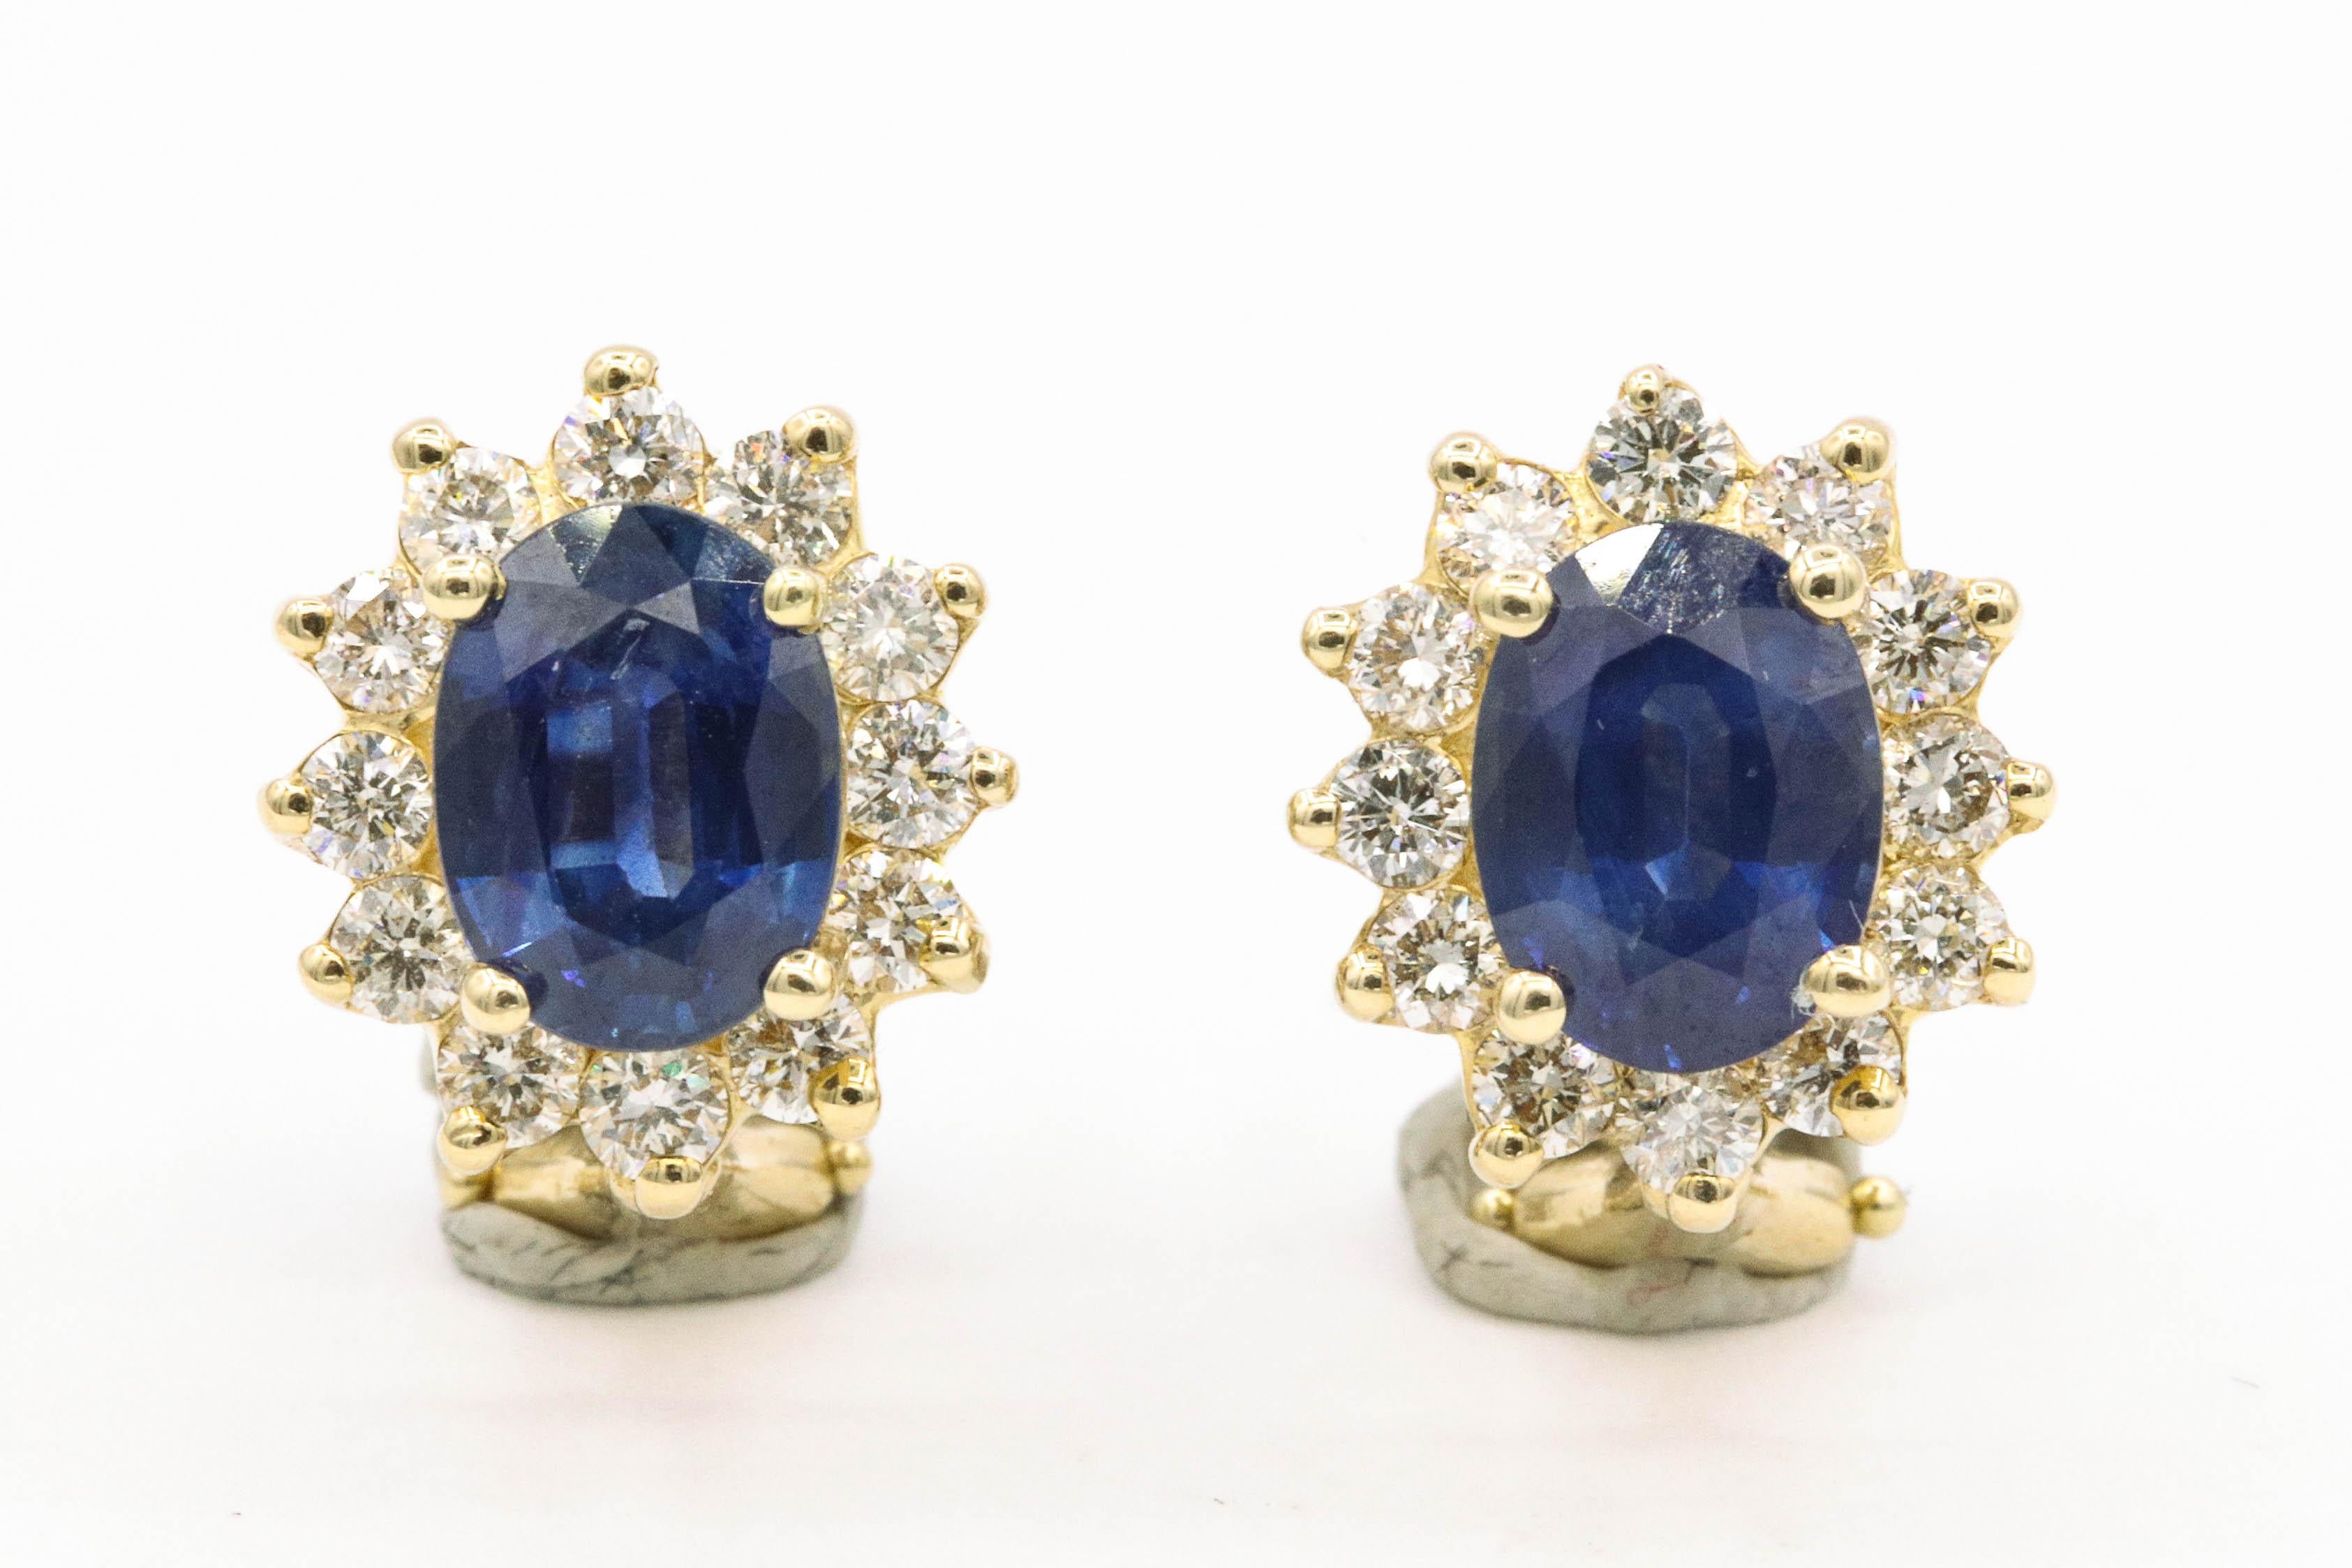 14K Yellow gold stud earrings featuring two oval shape blue sapphires, 3.20 carats flanked with round brilliants weighing 0.94 carats.
Color G-H
Clarity SI